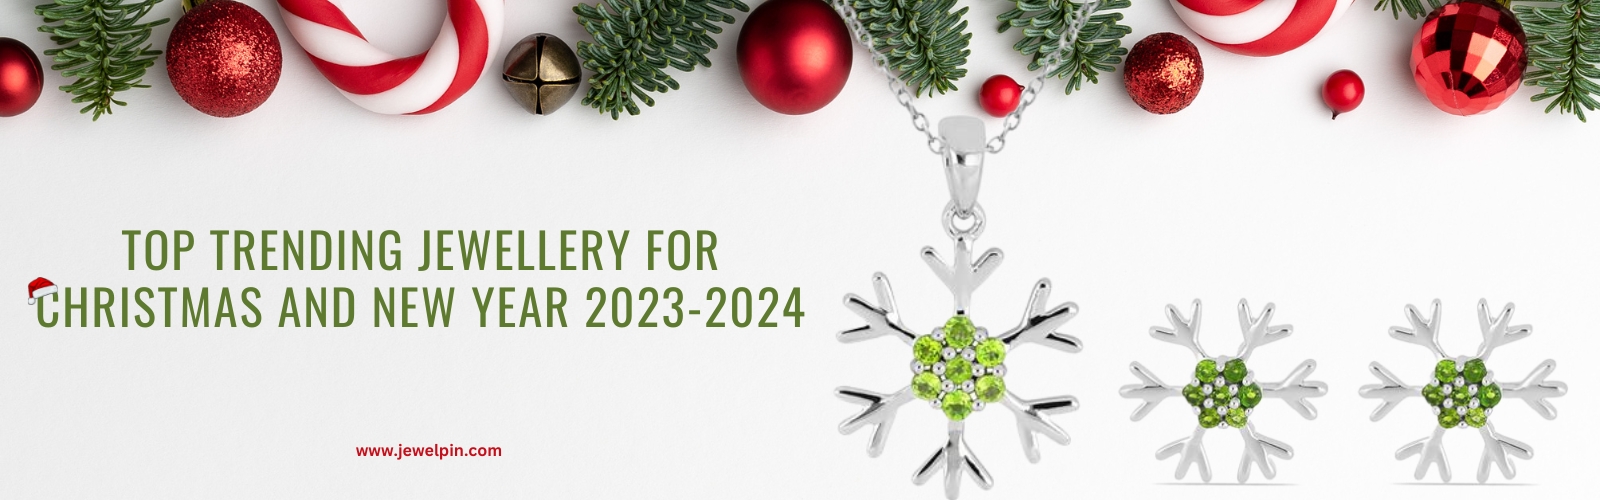 top trending jewellery for christmas 2023 and new year 2024 a guide by jewelpin